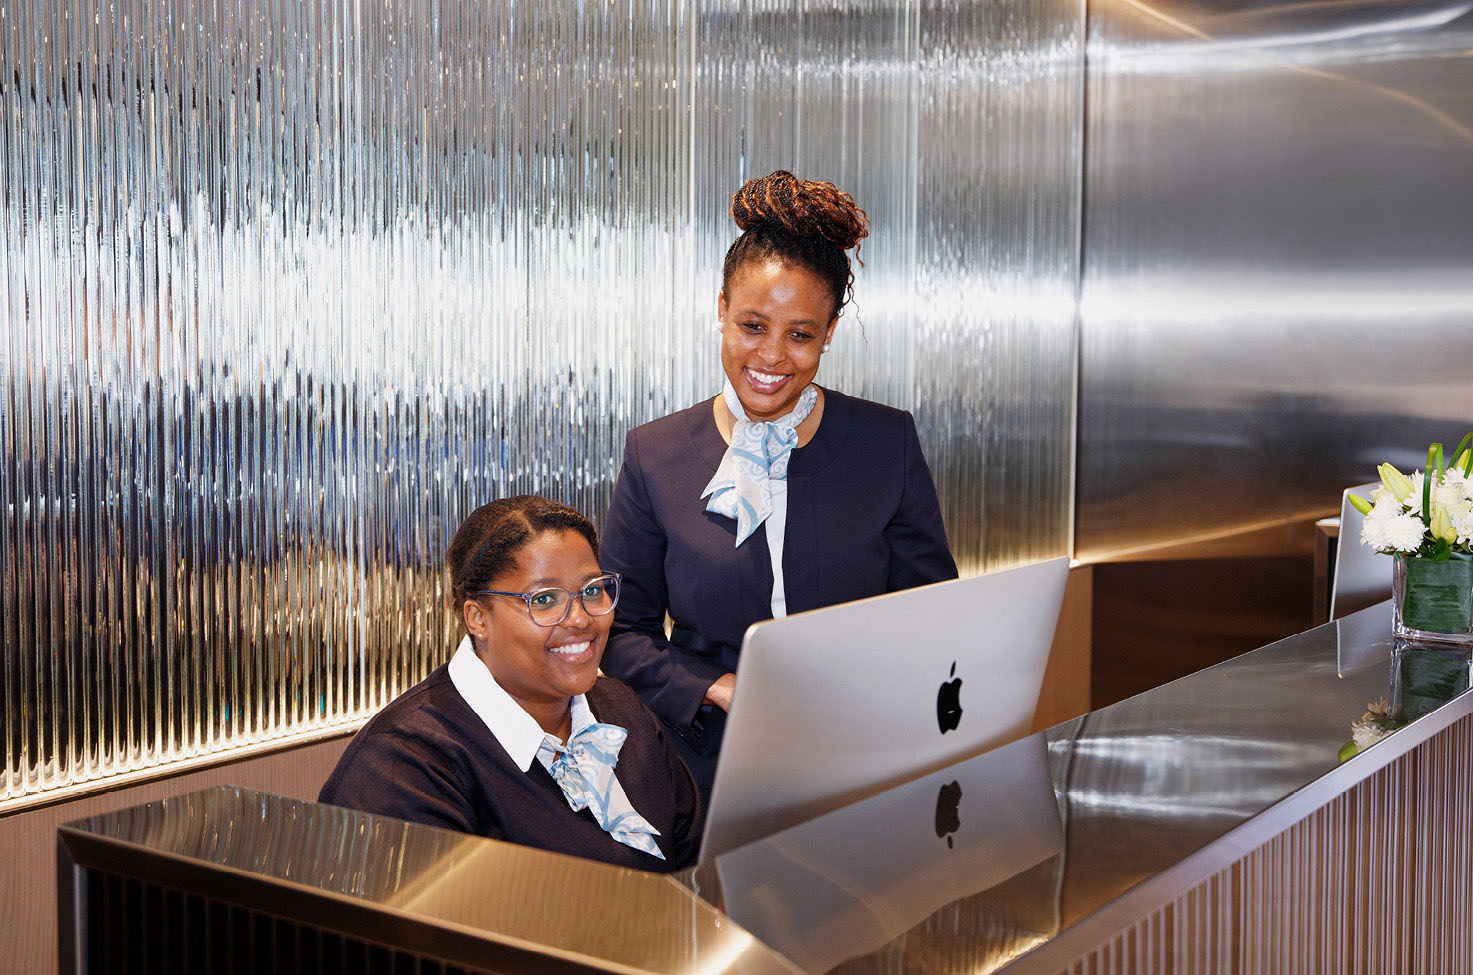 Two smiling receptionists, behind their well-polished desk, looking at a computer monitor